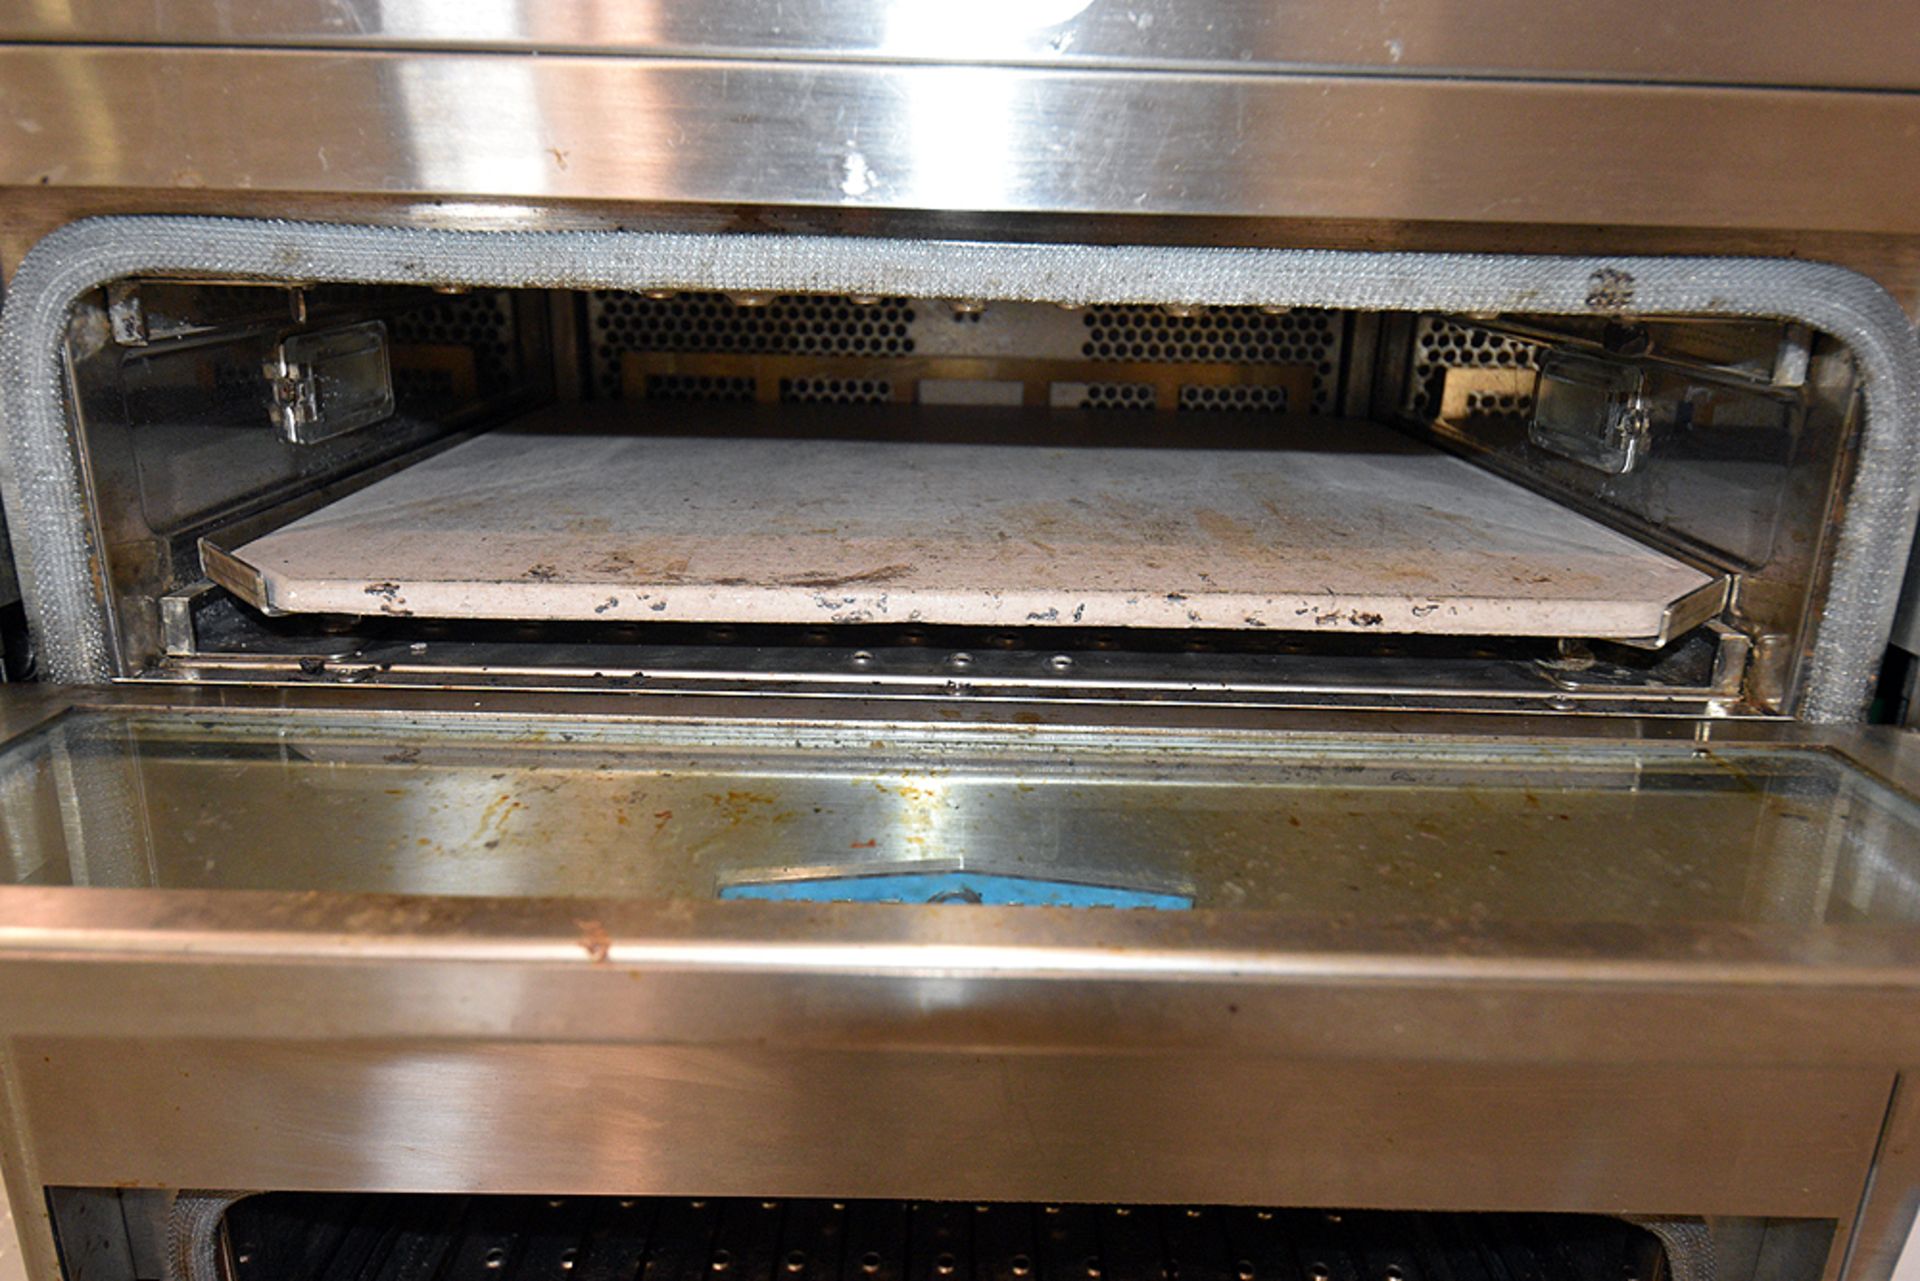 TurboChef Double Batch Ventless Countertop Oven - Image 6 of 8